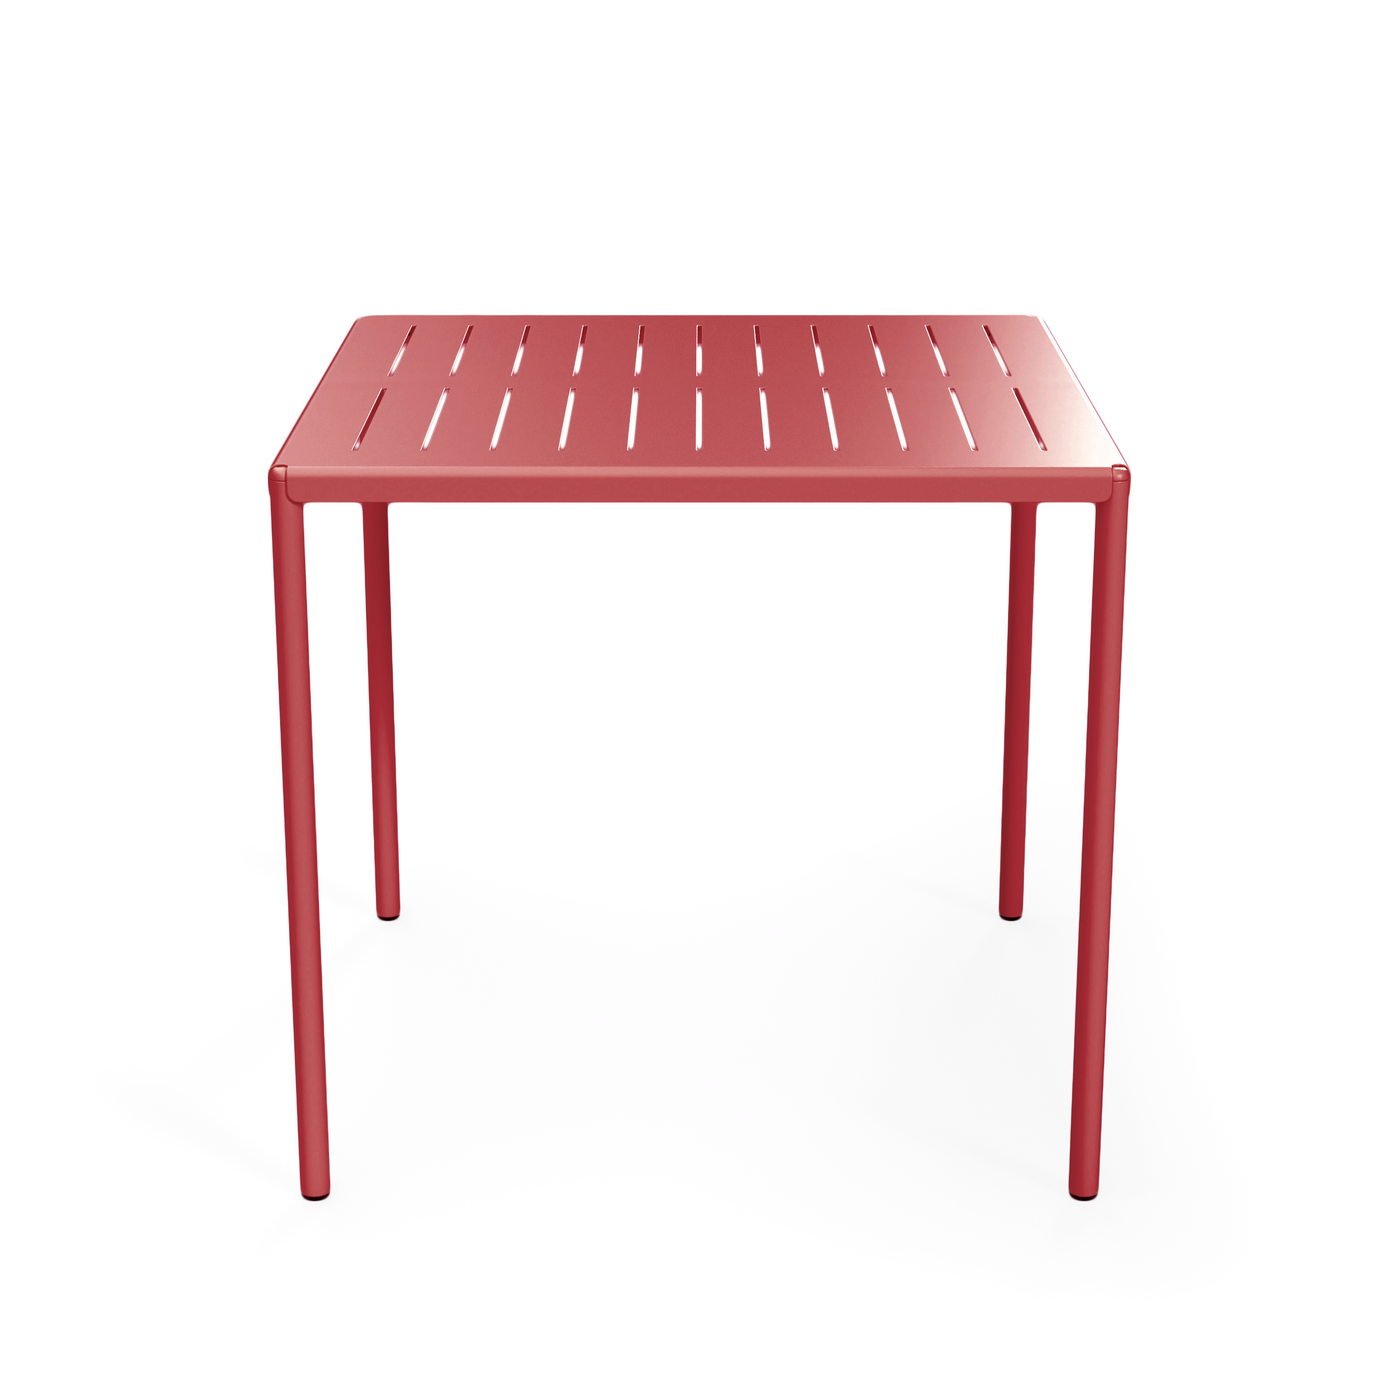 Frame Metal Garden Table, 4 Seater, Berry Red